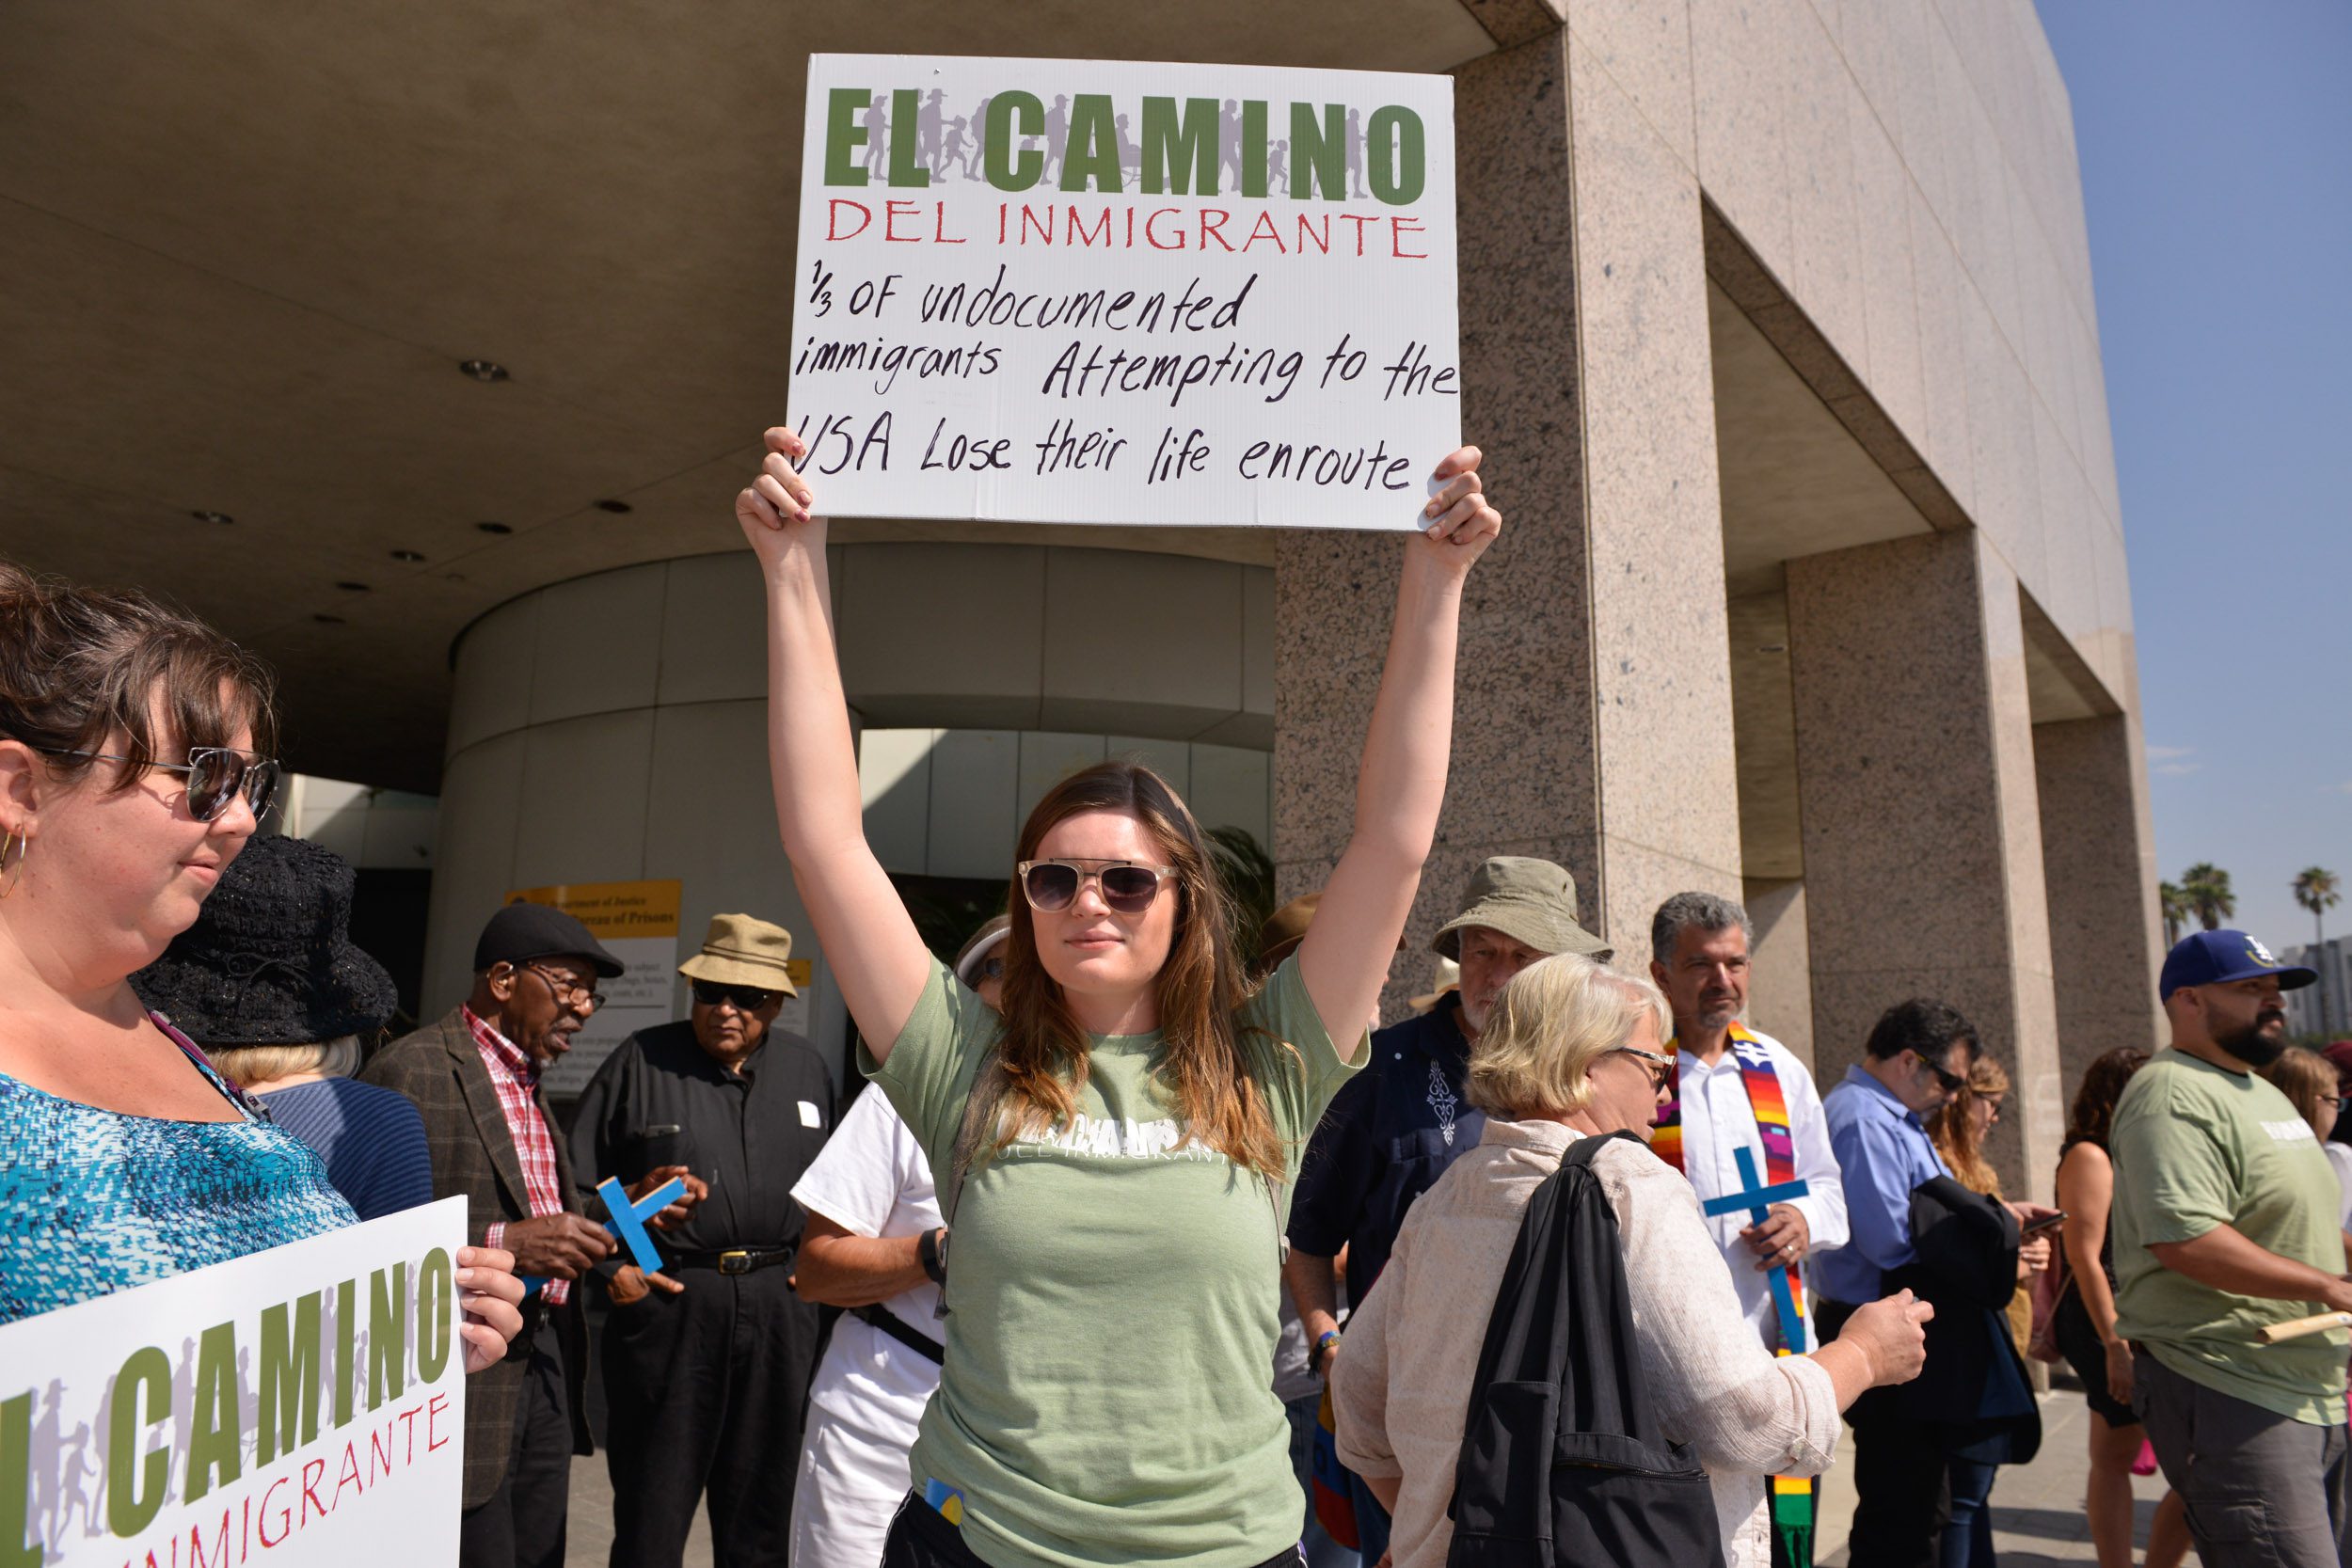 Participants of the El Camino, a 150-mile walk to draw attention to the immigration crisis in the U.S., attend a rally at the Detention Center in downtown Los Angeles. Buddy Bleckley for Bread for the World.